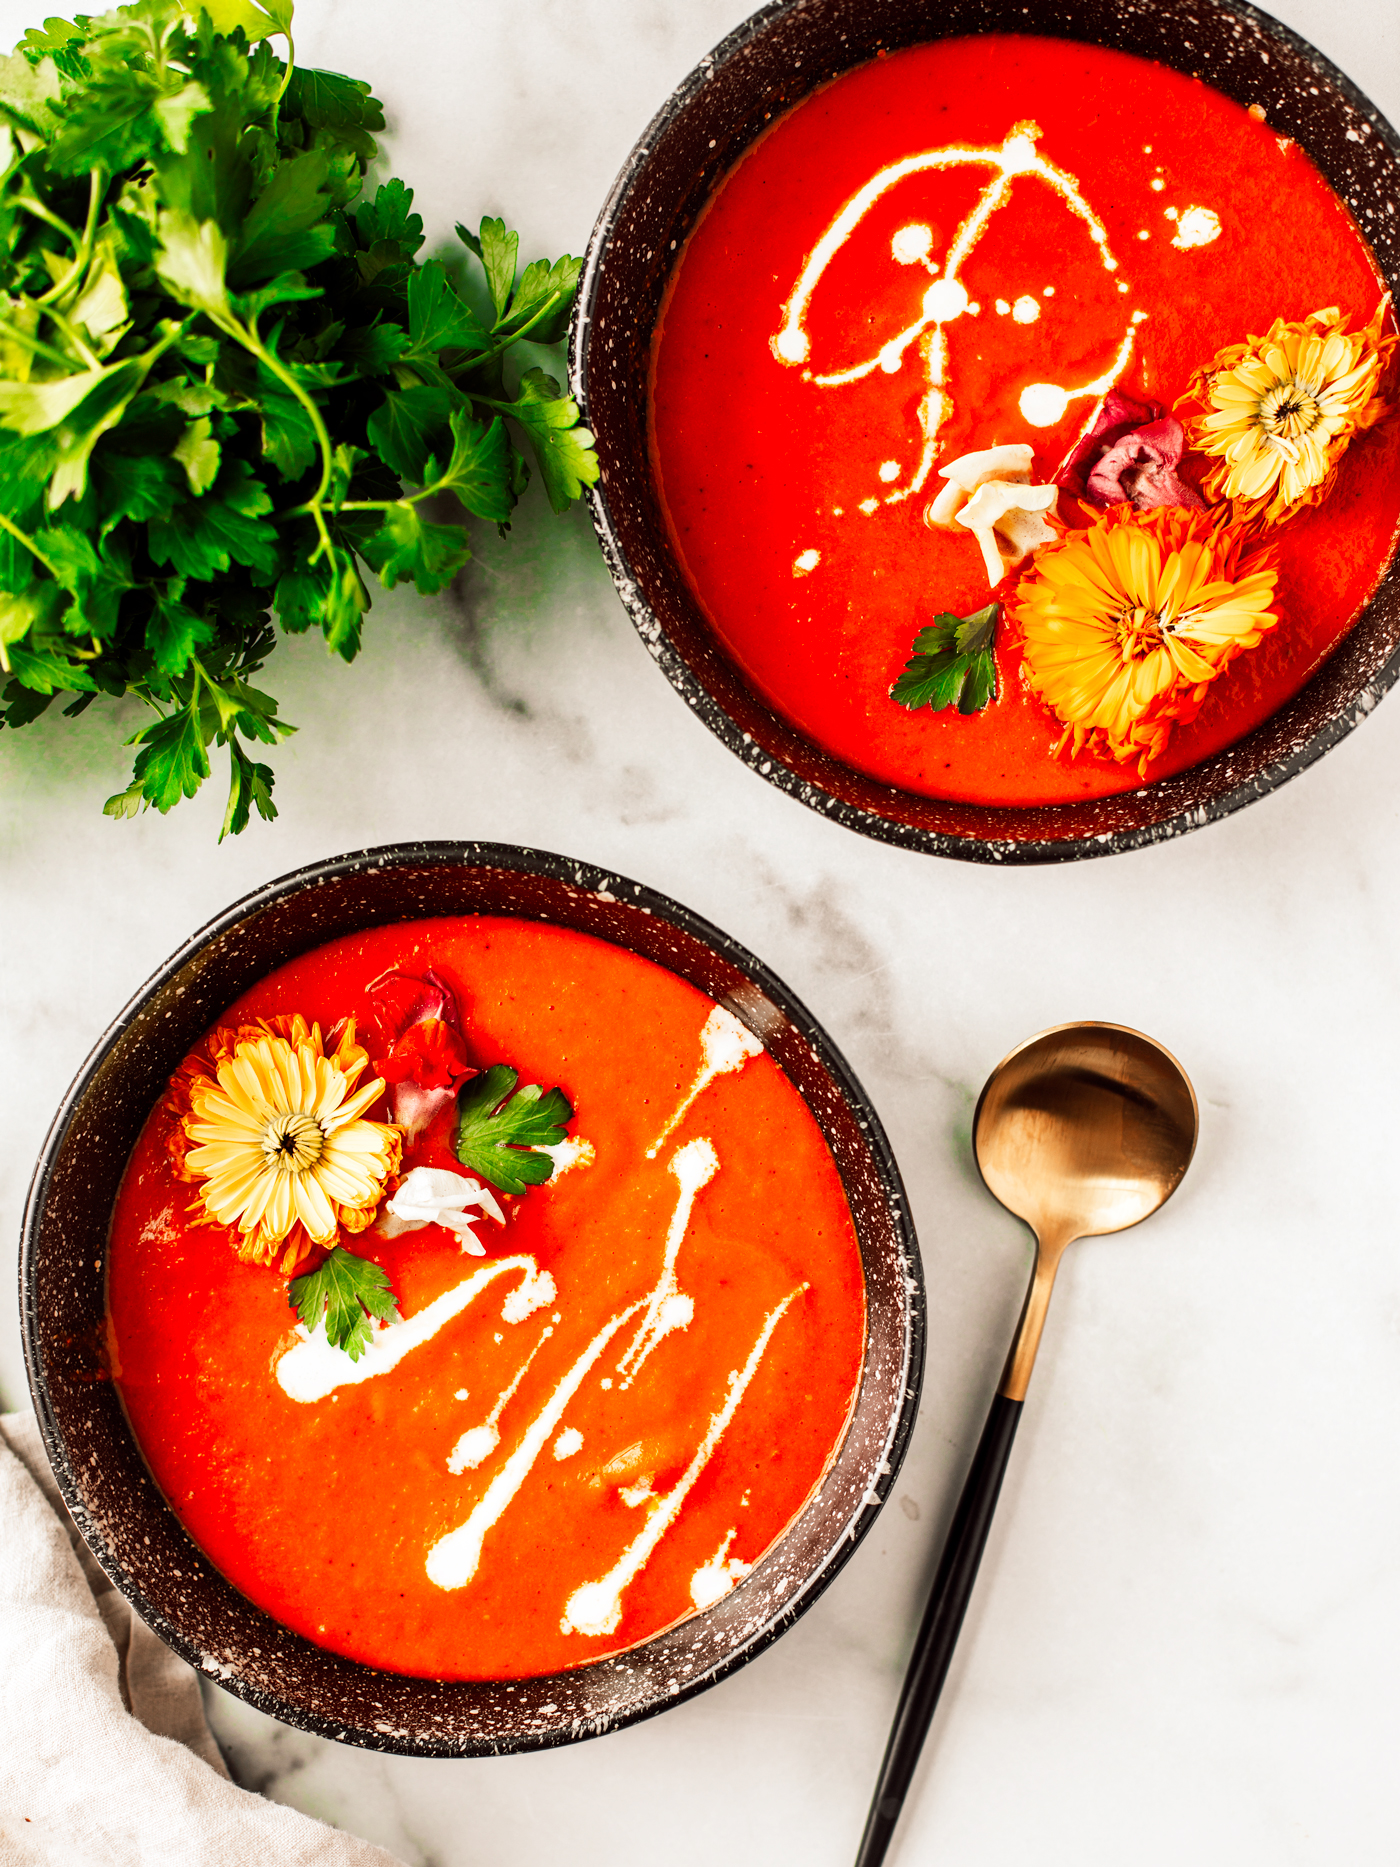 Two bowls of roasted red pepper soup garnished with drizzled cream and edible flowers.